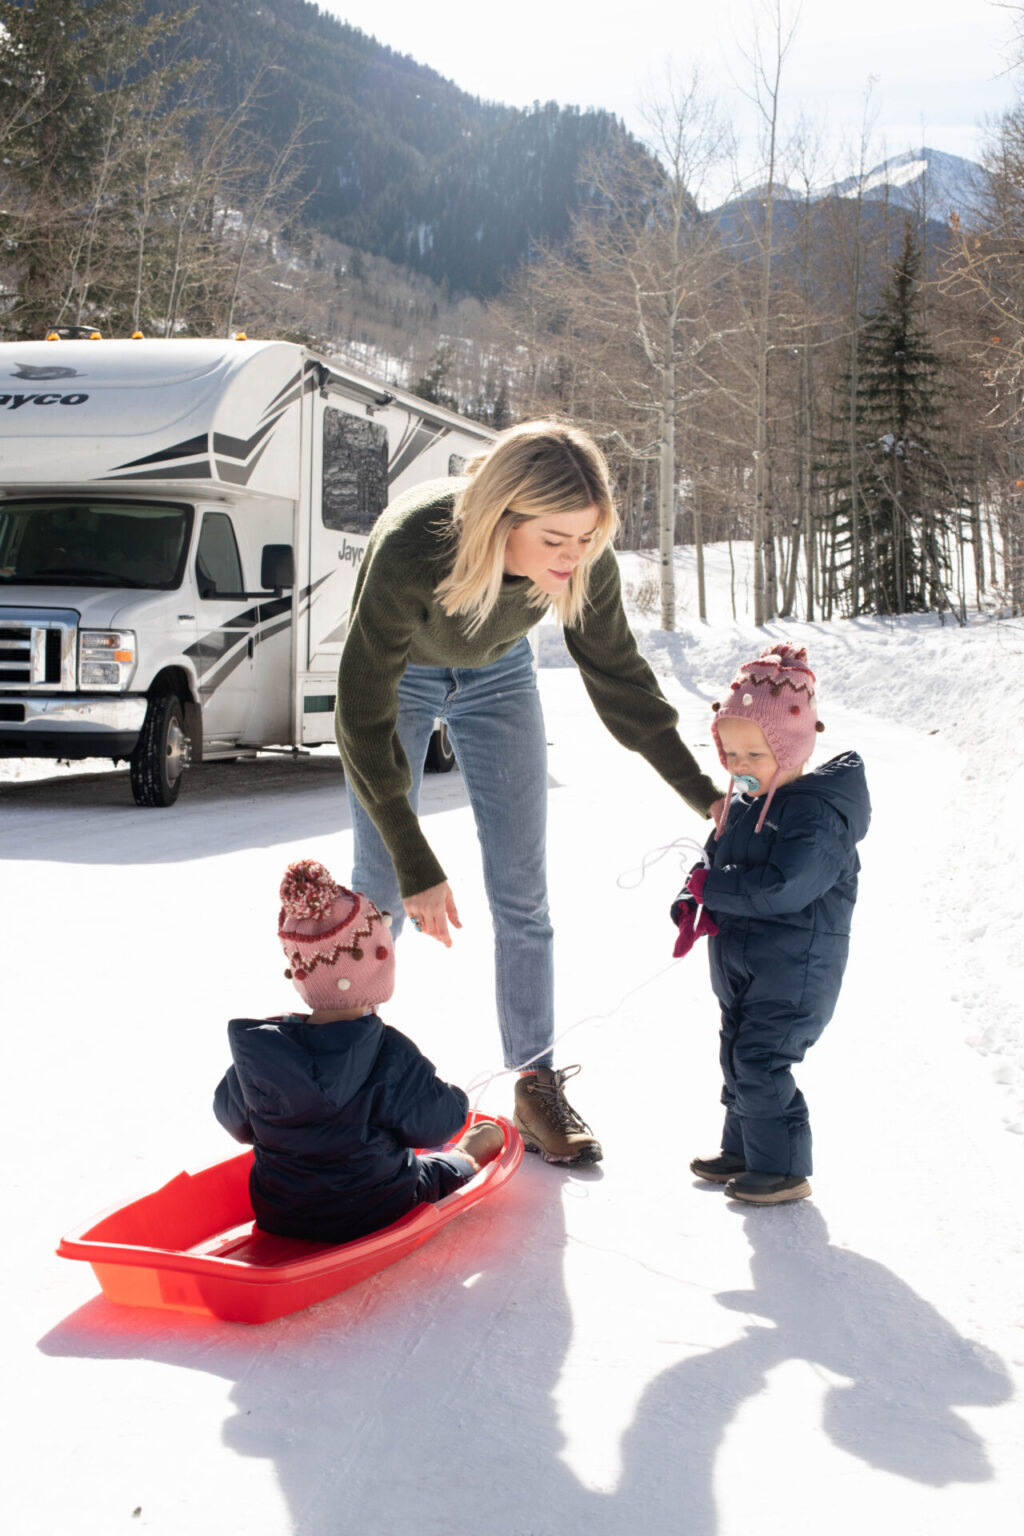 RVing in The Winter | How to Winterize a Travel Trailer